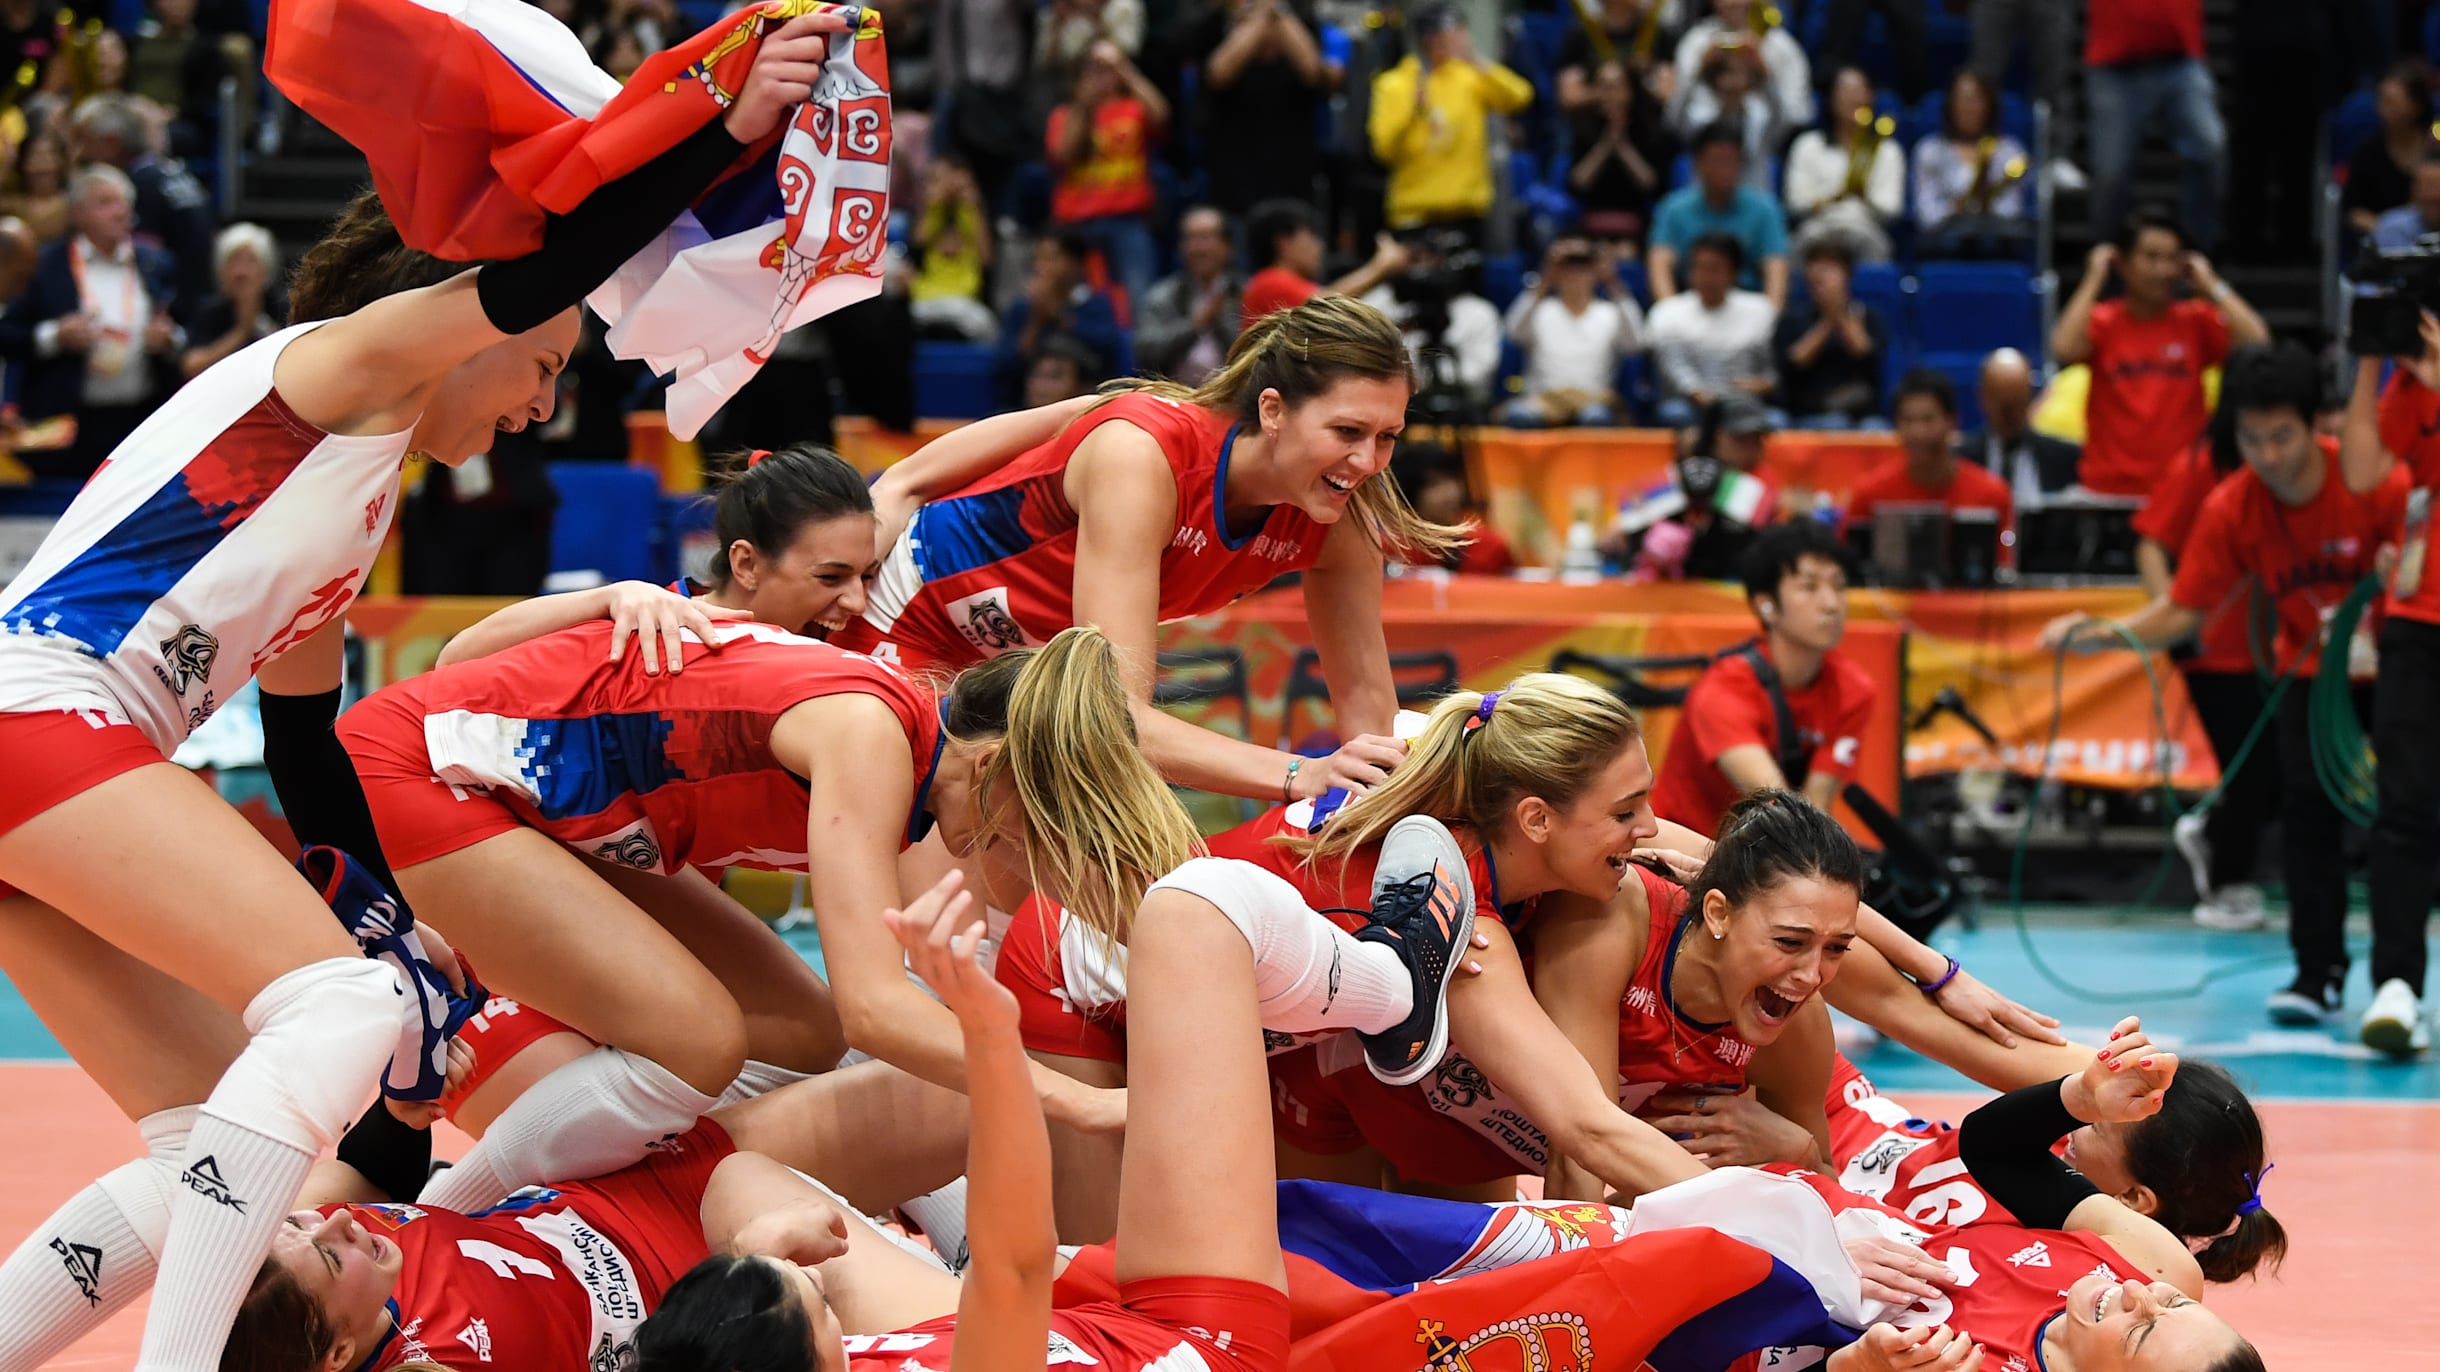 FIVB Volleyball 2022 Womens World Championship Preview, schedule and stars to watch